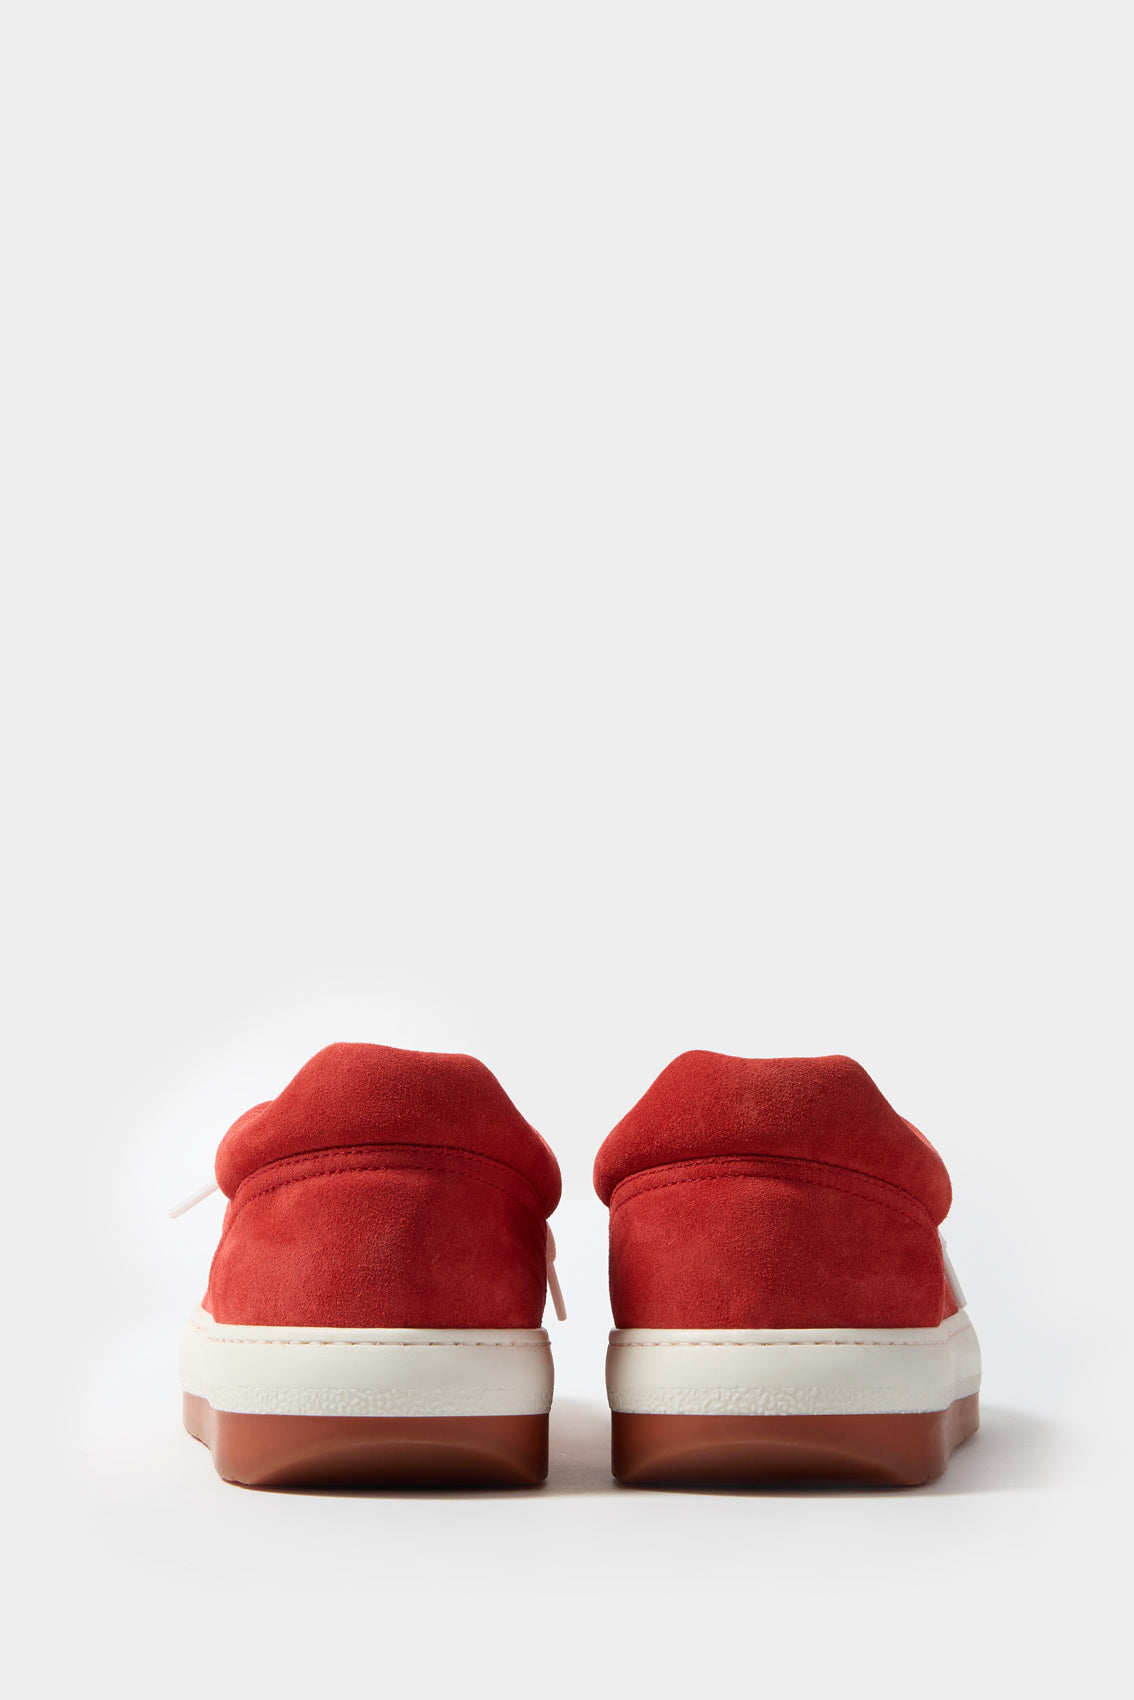 DREAMY SHOES / suede / red